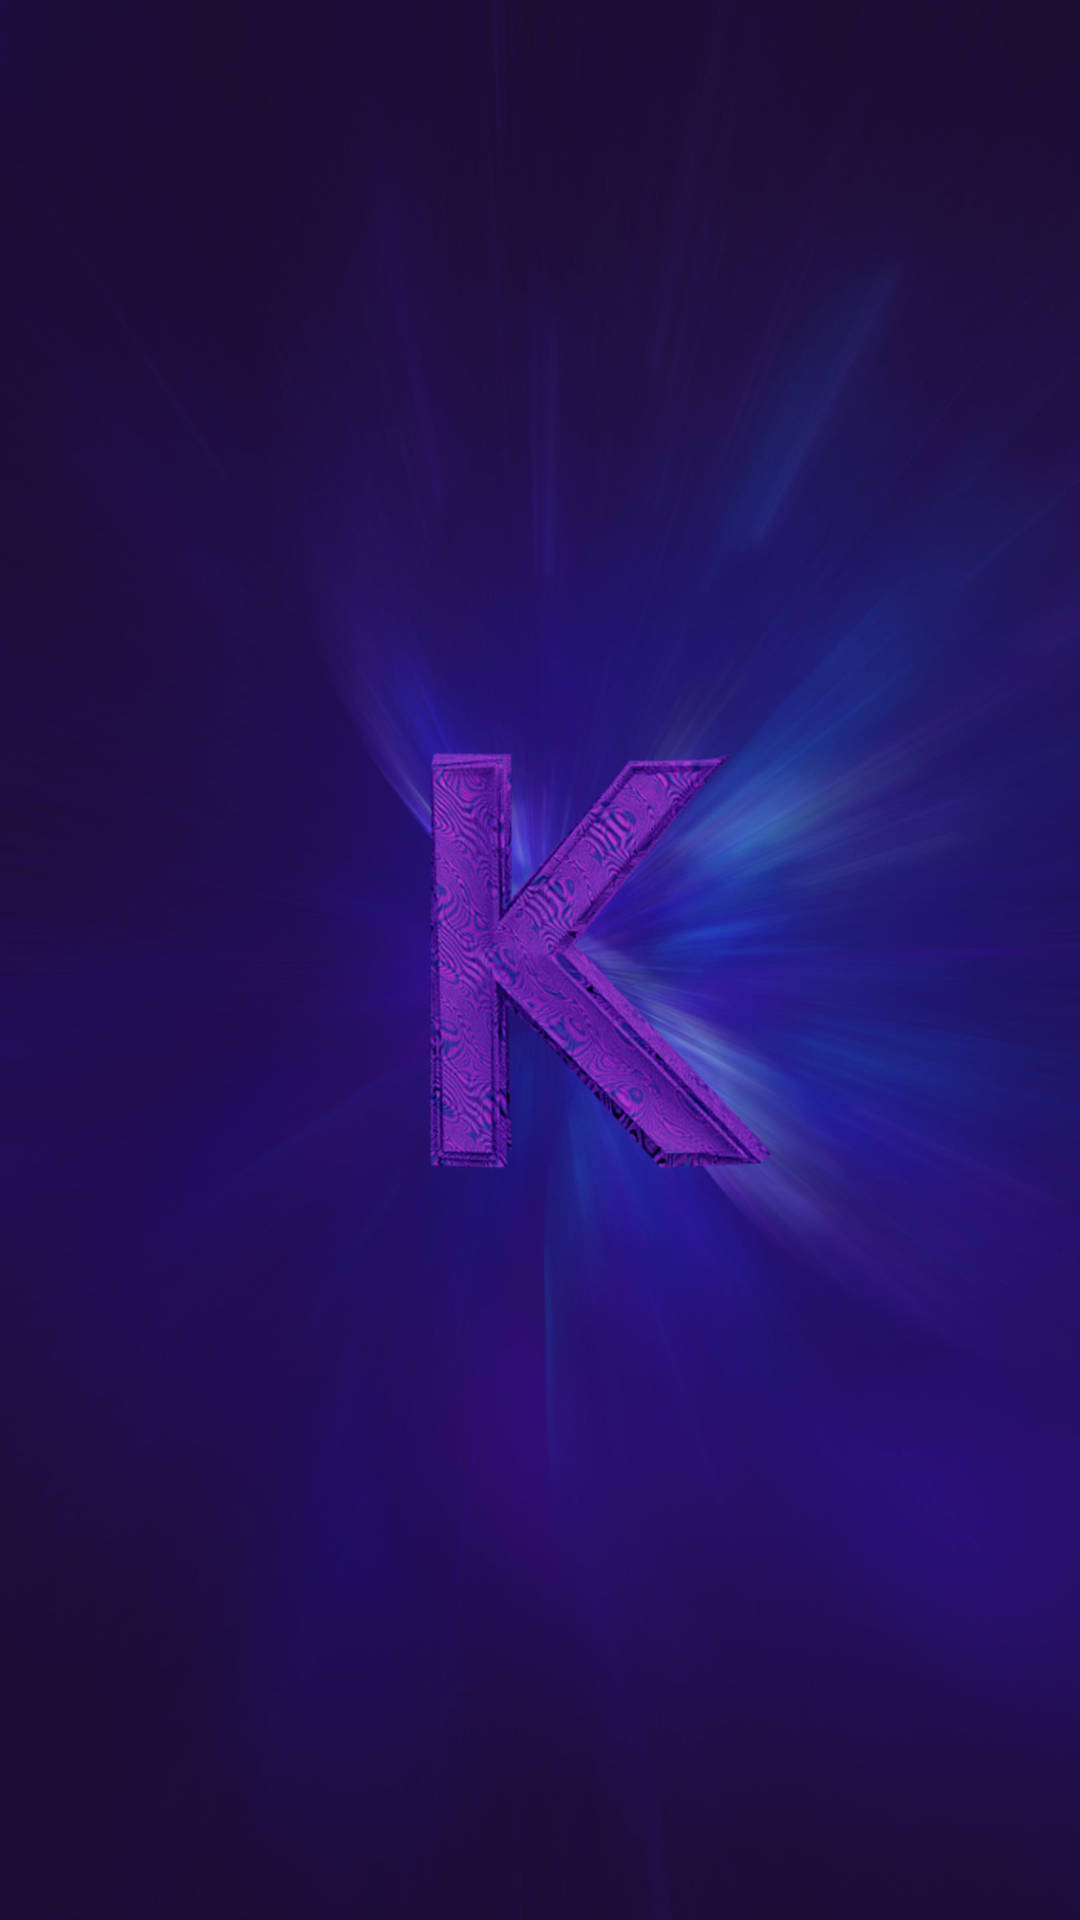 Abstract Purple Letter K